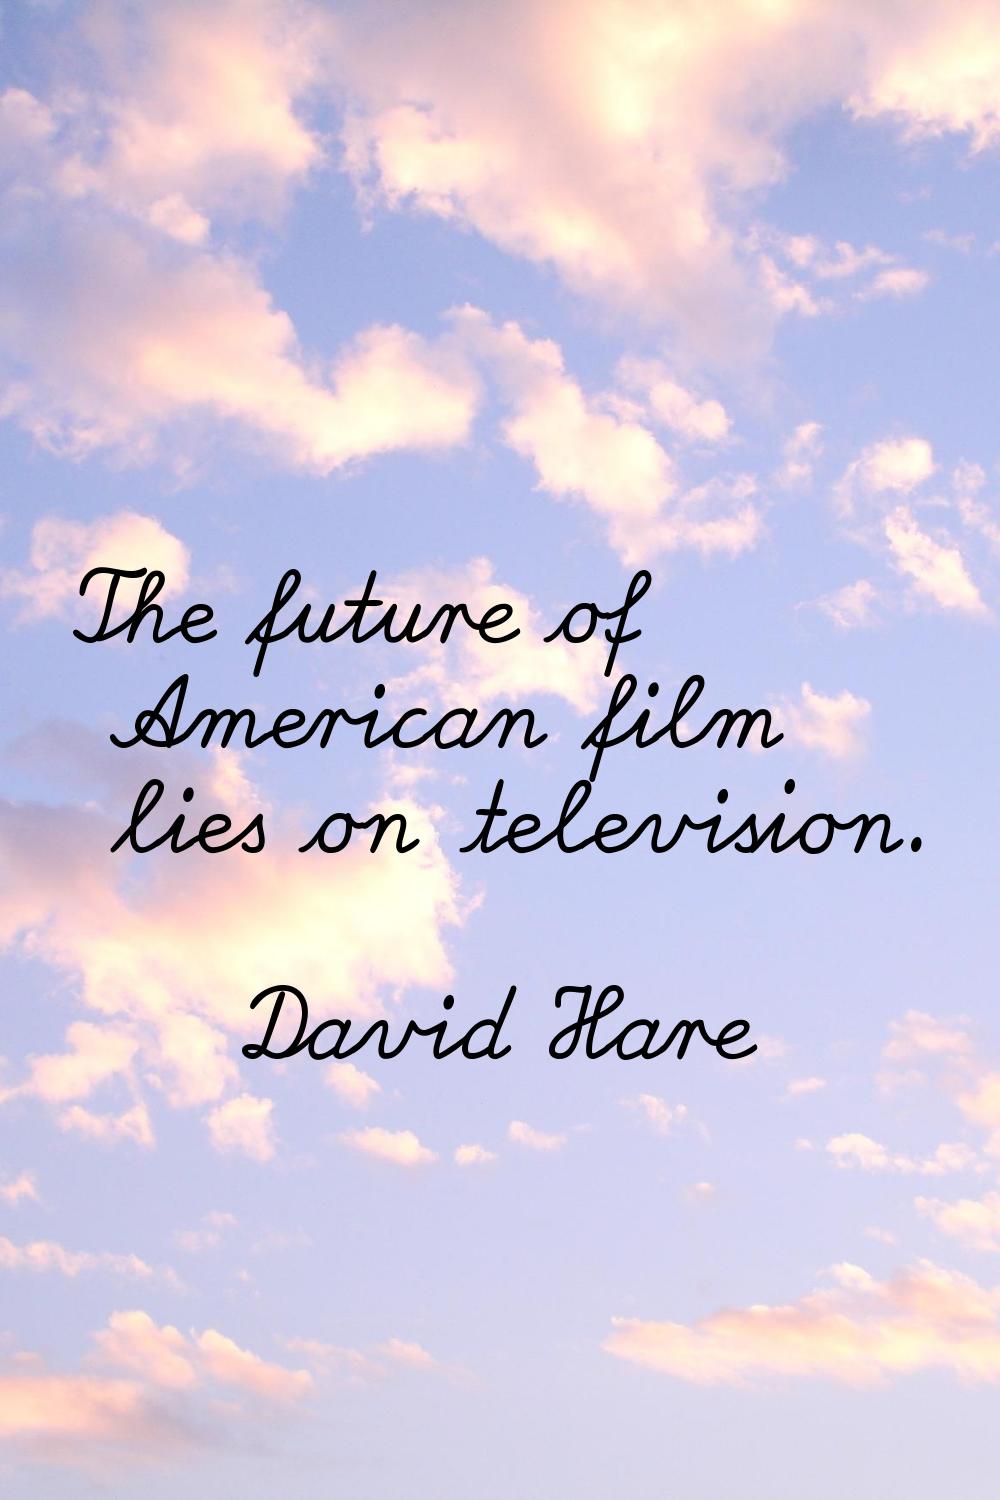 The future of American film lies on television.